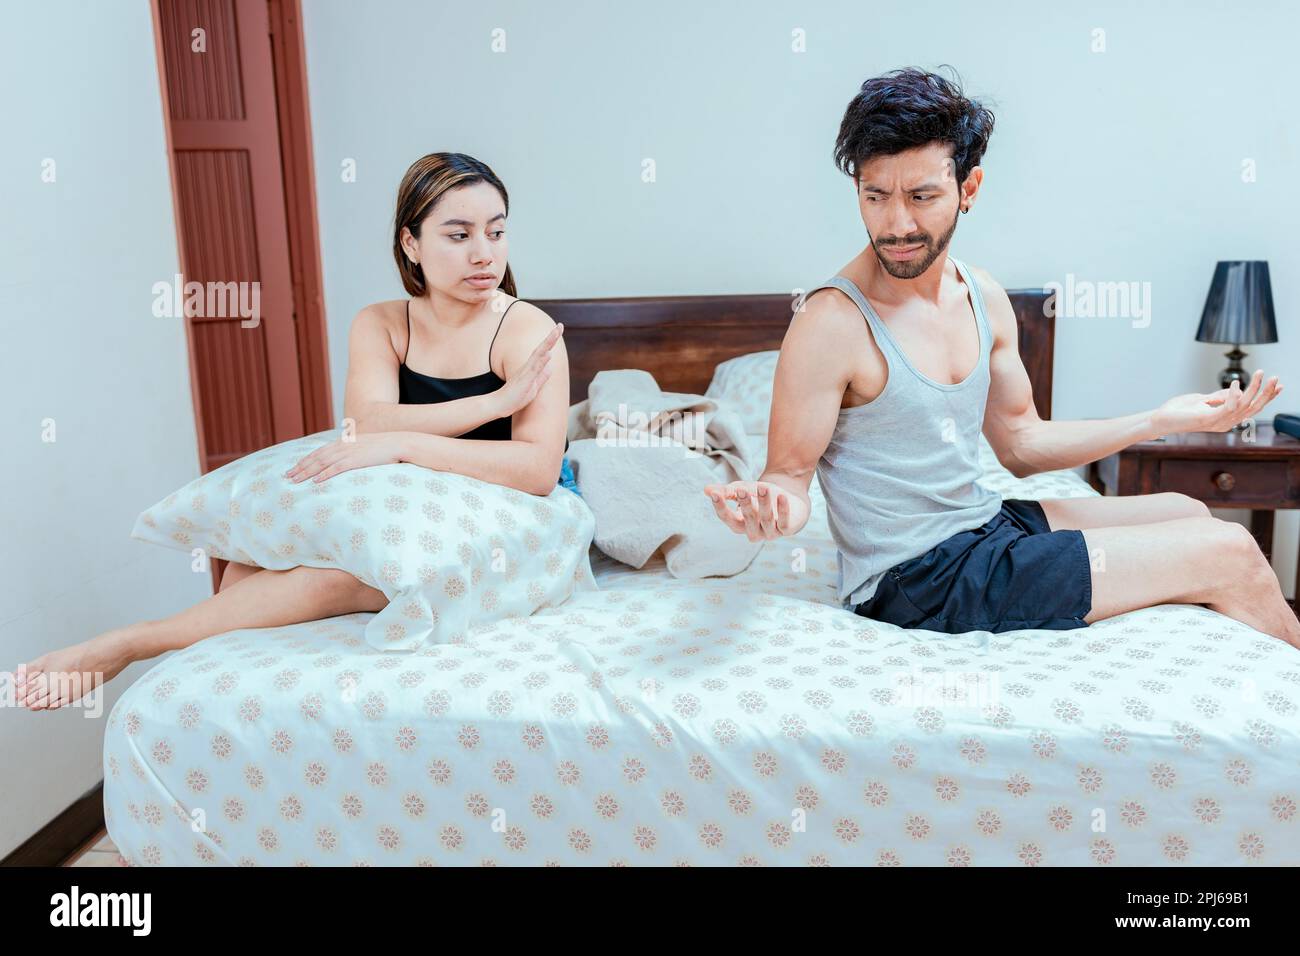 Man arguing with his wife in the bedroom bed. Upset wife ignoring husband in bed. young couple arguing in the bedroom. Concept of couple crisis in bed Stock Photo